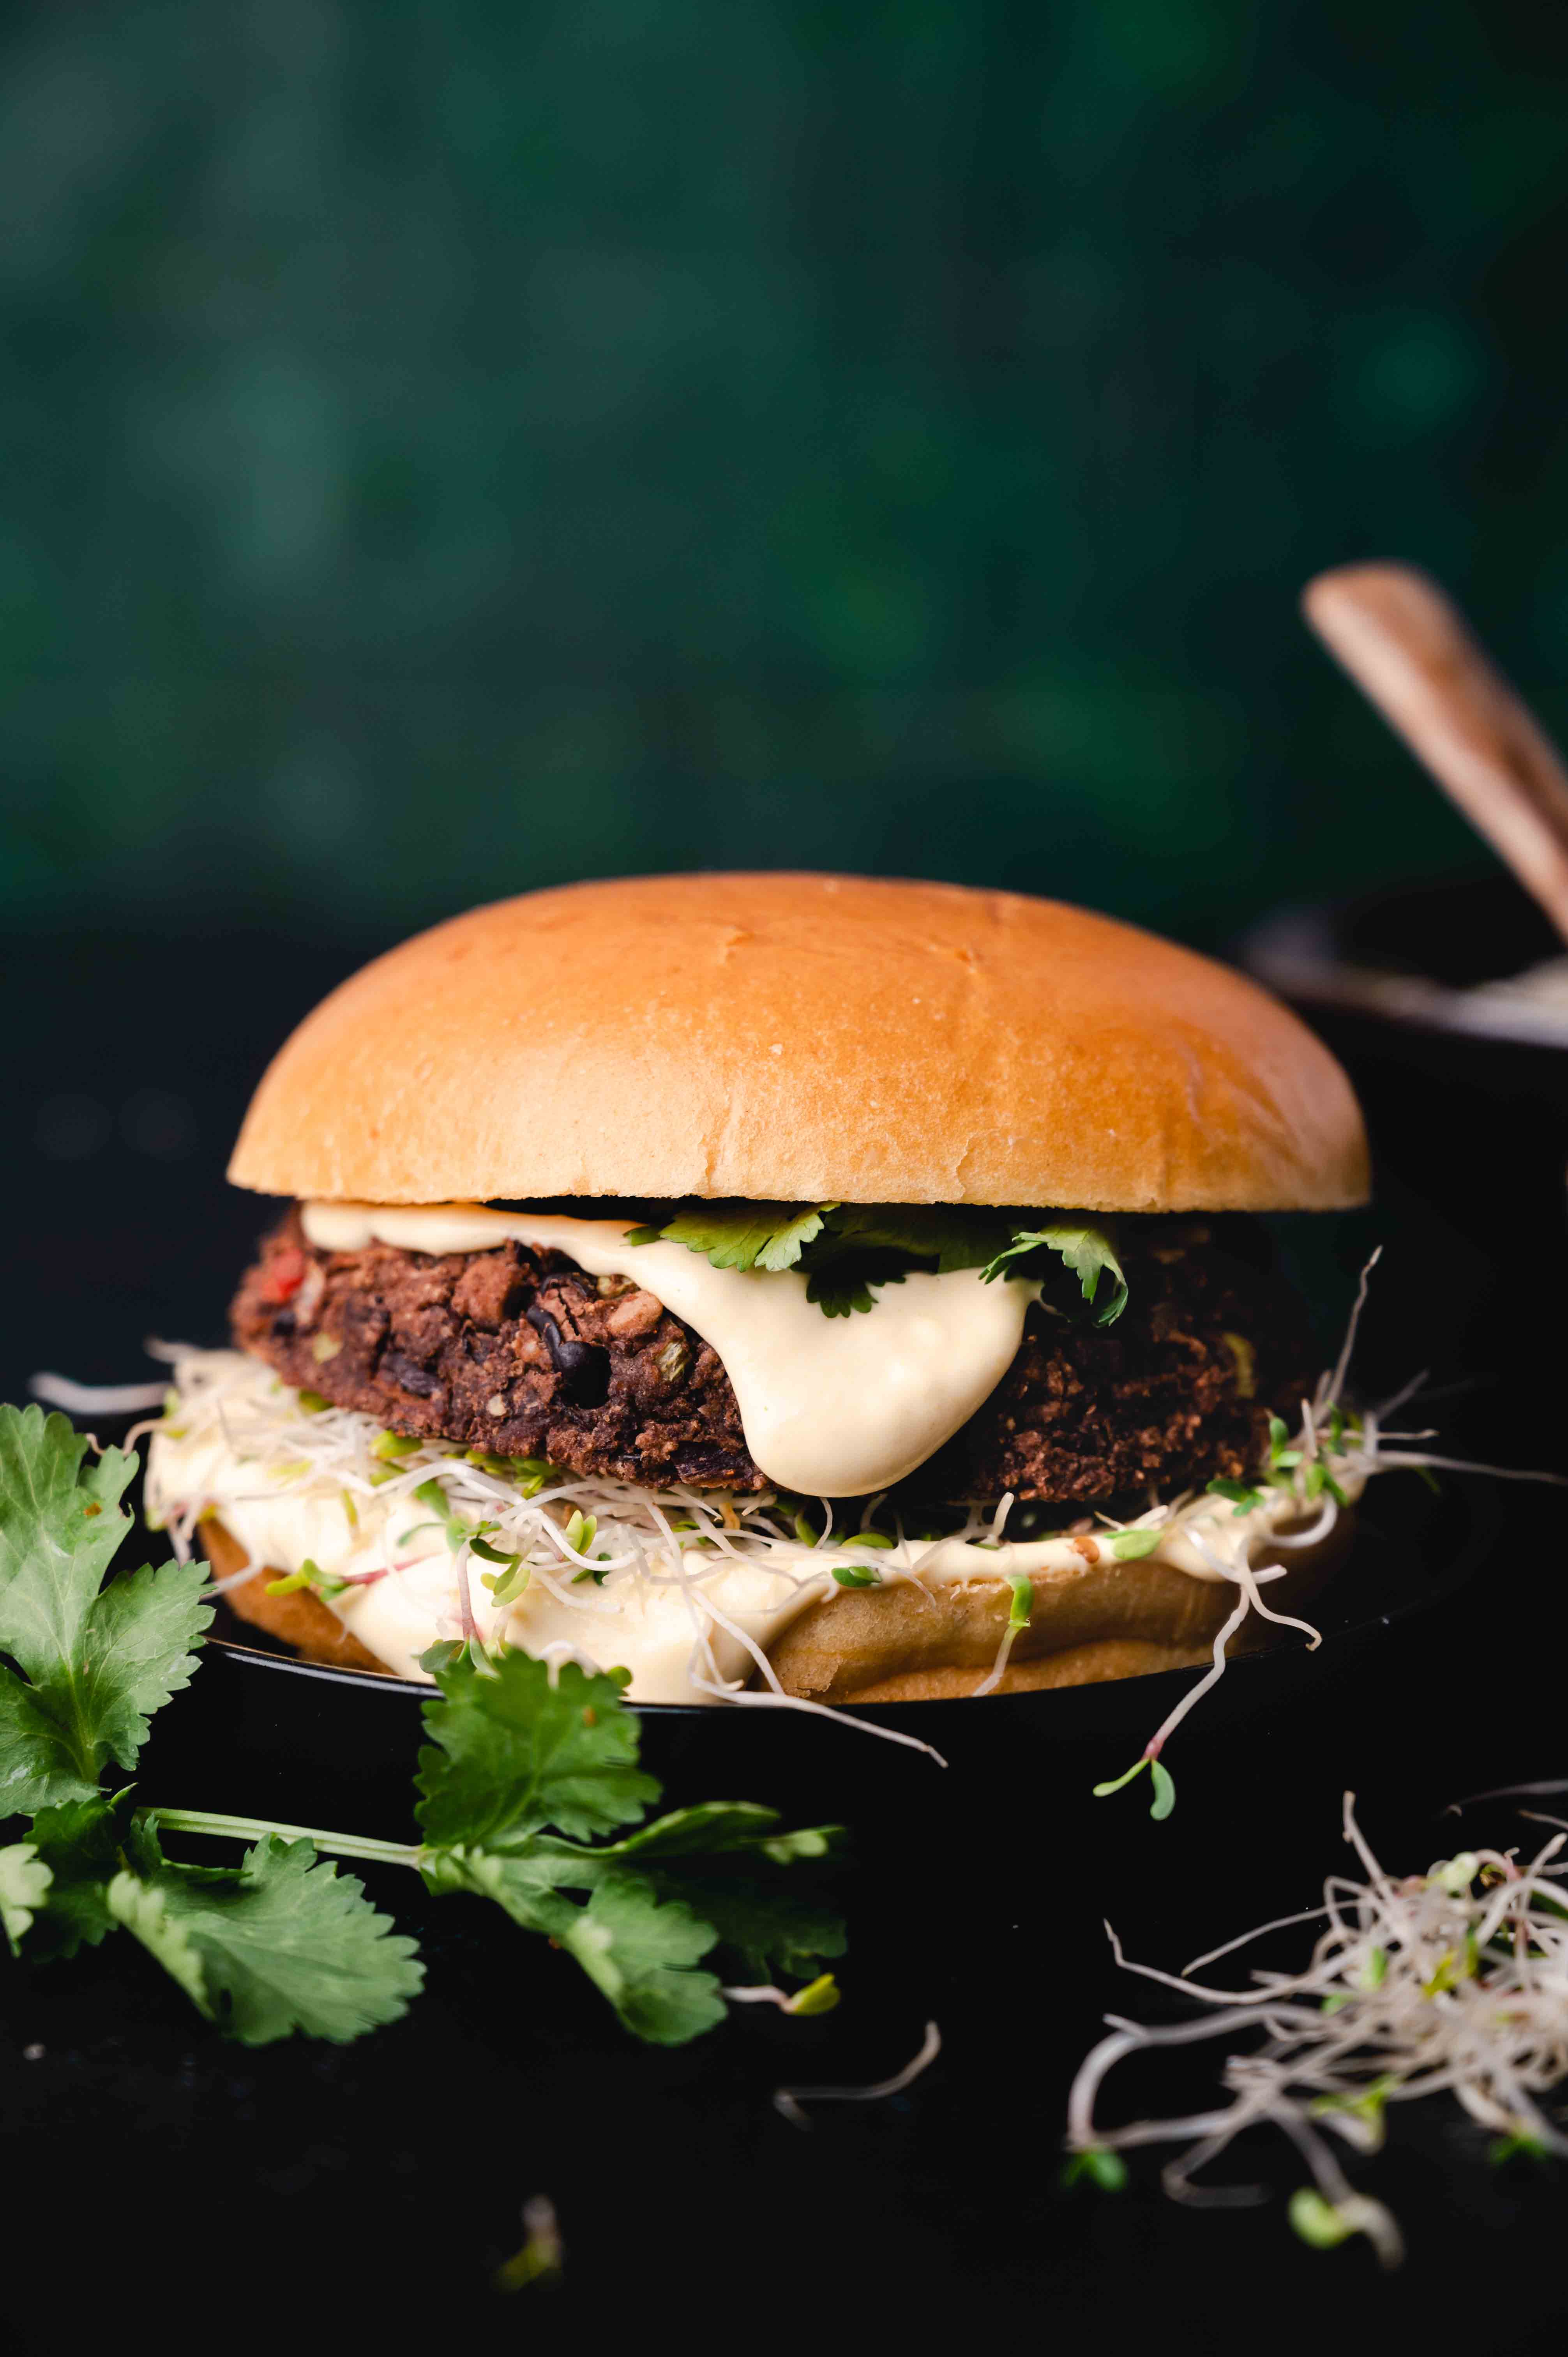 A veggie burger with a slice of cheese, lettuce, and sprouts on a black plate against a dark green background.